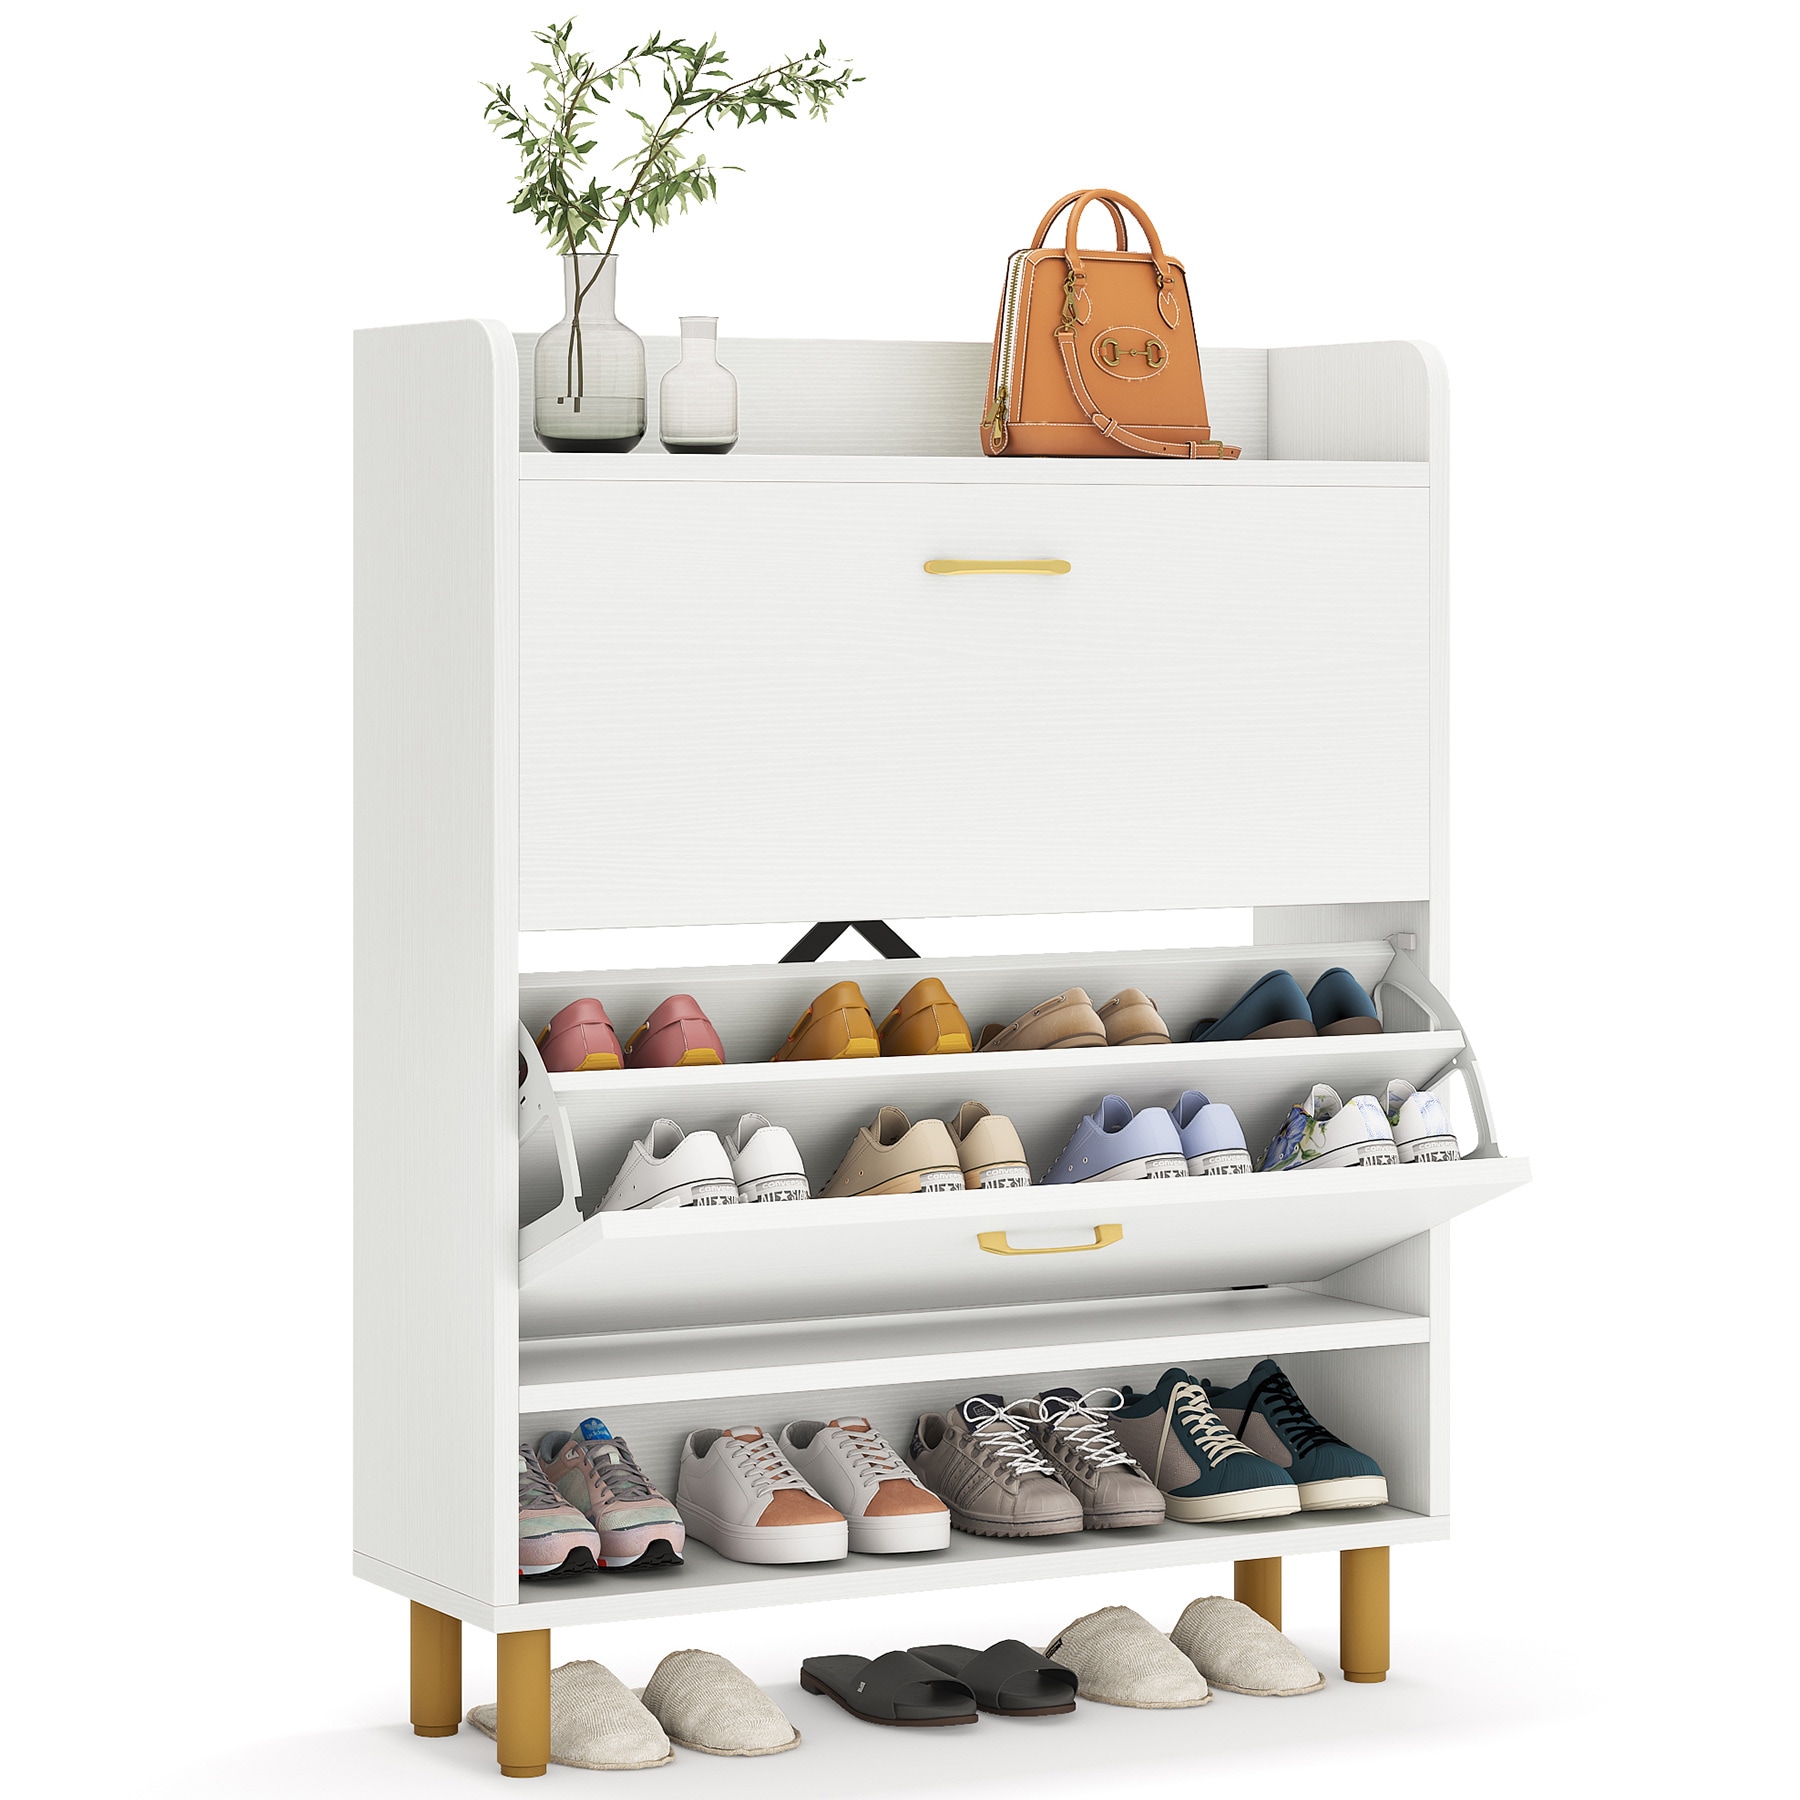 Zoo fuse chant Tribesigns 3-Tier Shoe Storage Cabinet, 24 Pair Tall Shoe Cabinet with  Door, Vintage Shoe Organizer Rack with 2 Drawers and Open Shelves for  Entryway, Living room, Bedroom, Dorm Room, White in the